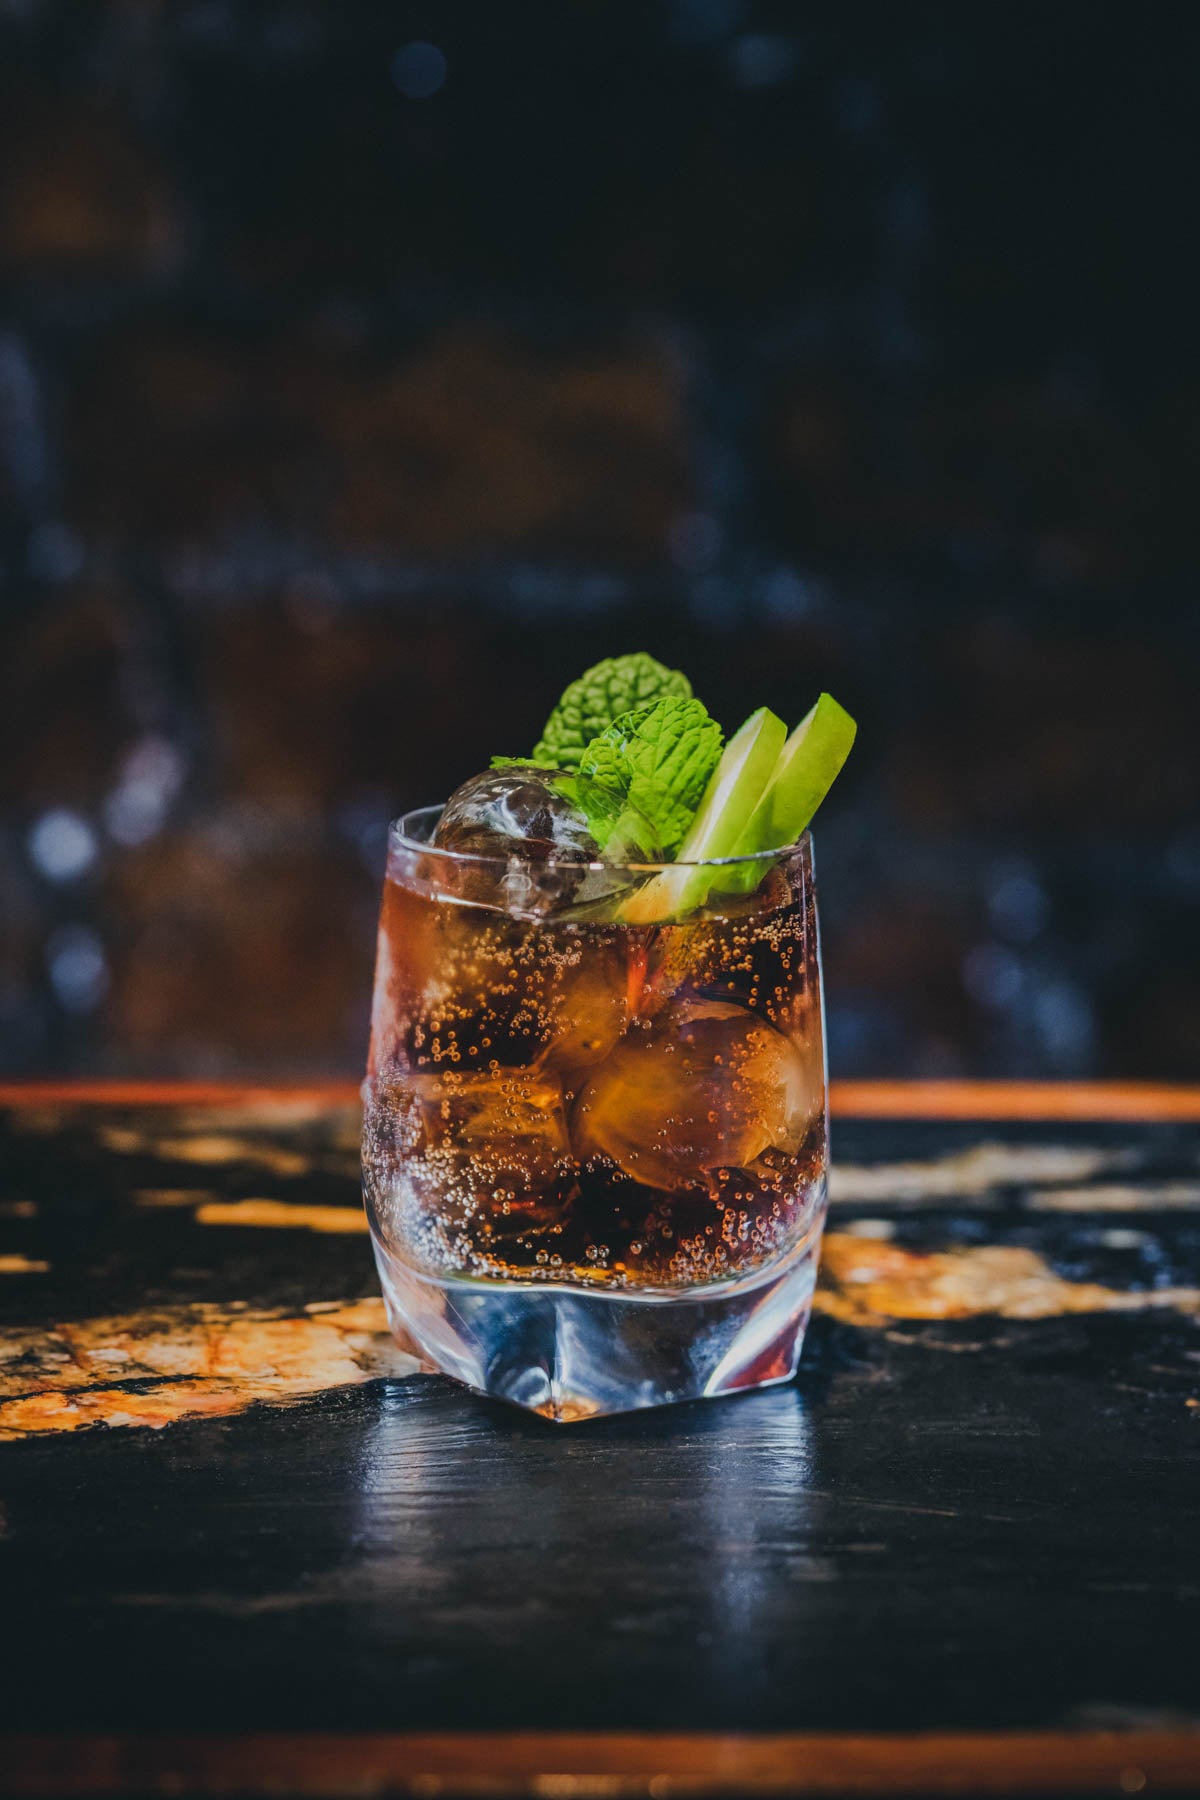 Our favourite Rum and Cola Recipe - the Kola Kup